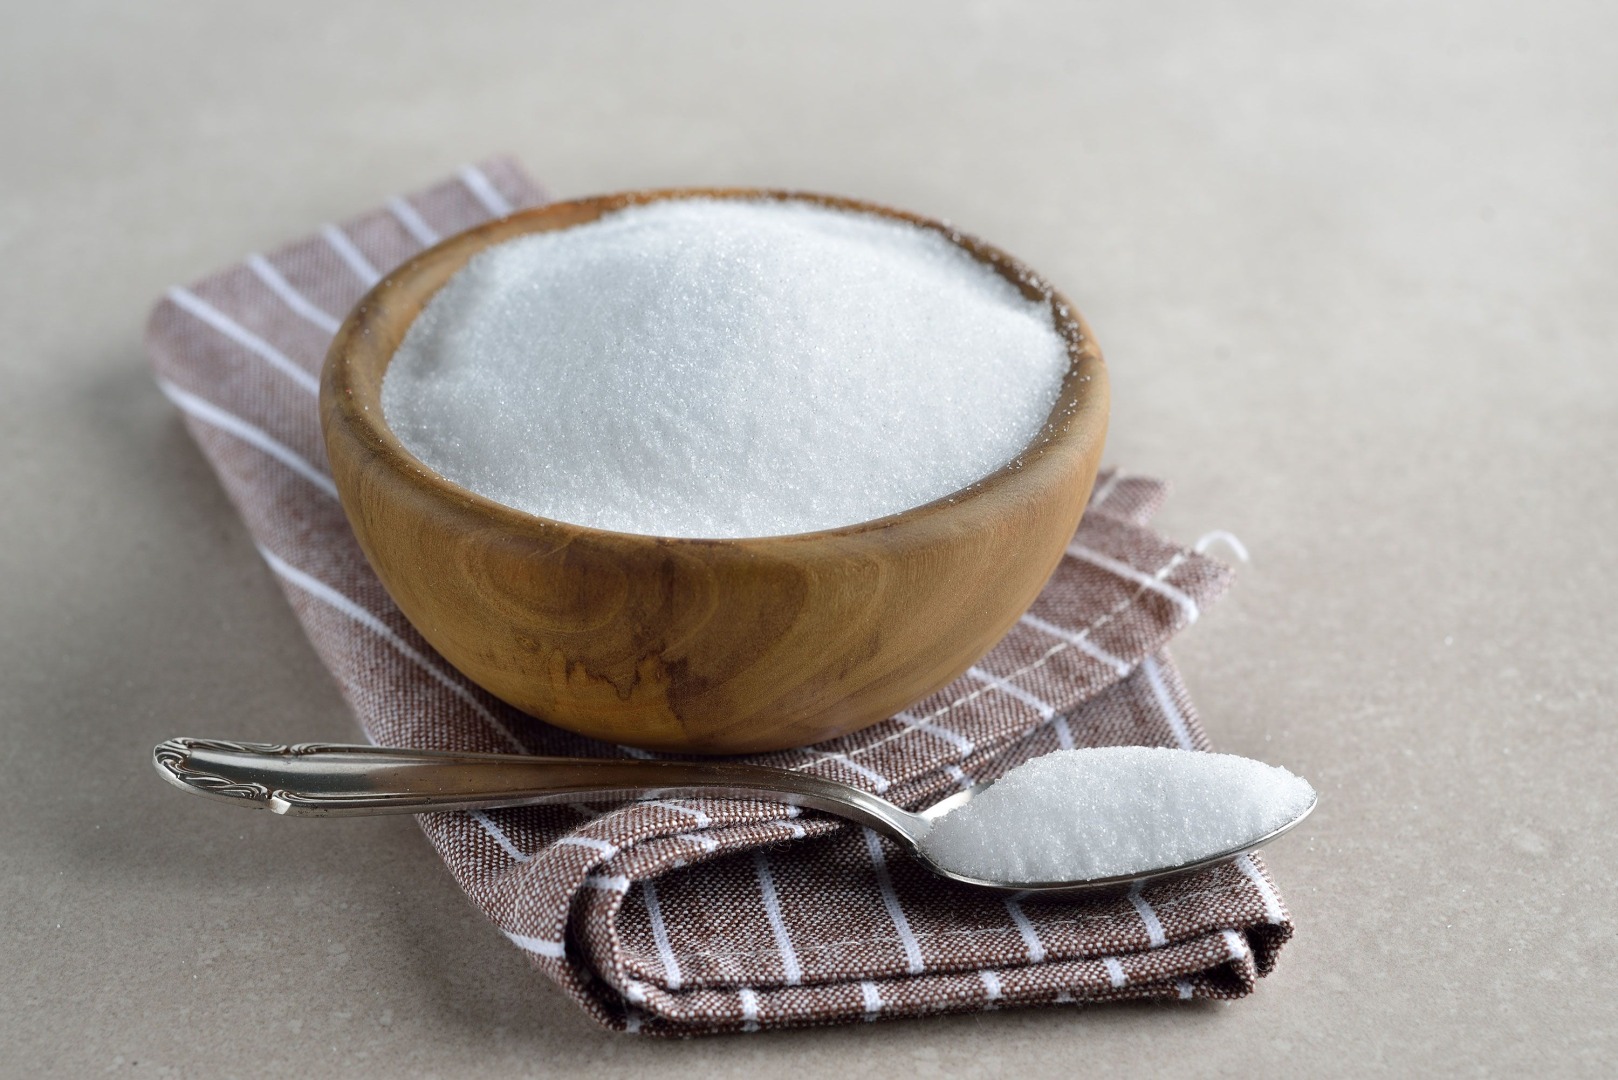 Erythritol, and the More Artful Avoidance of Excess Sugar